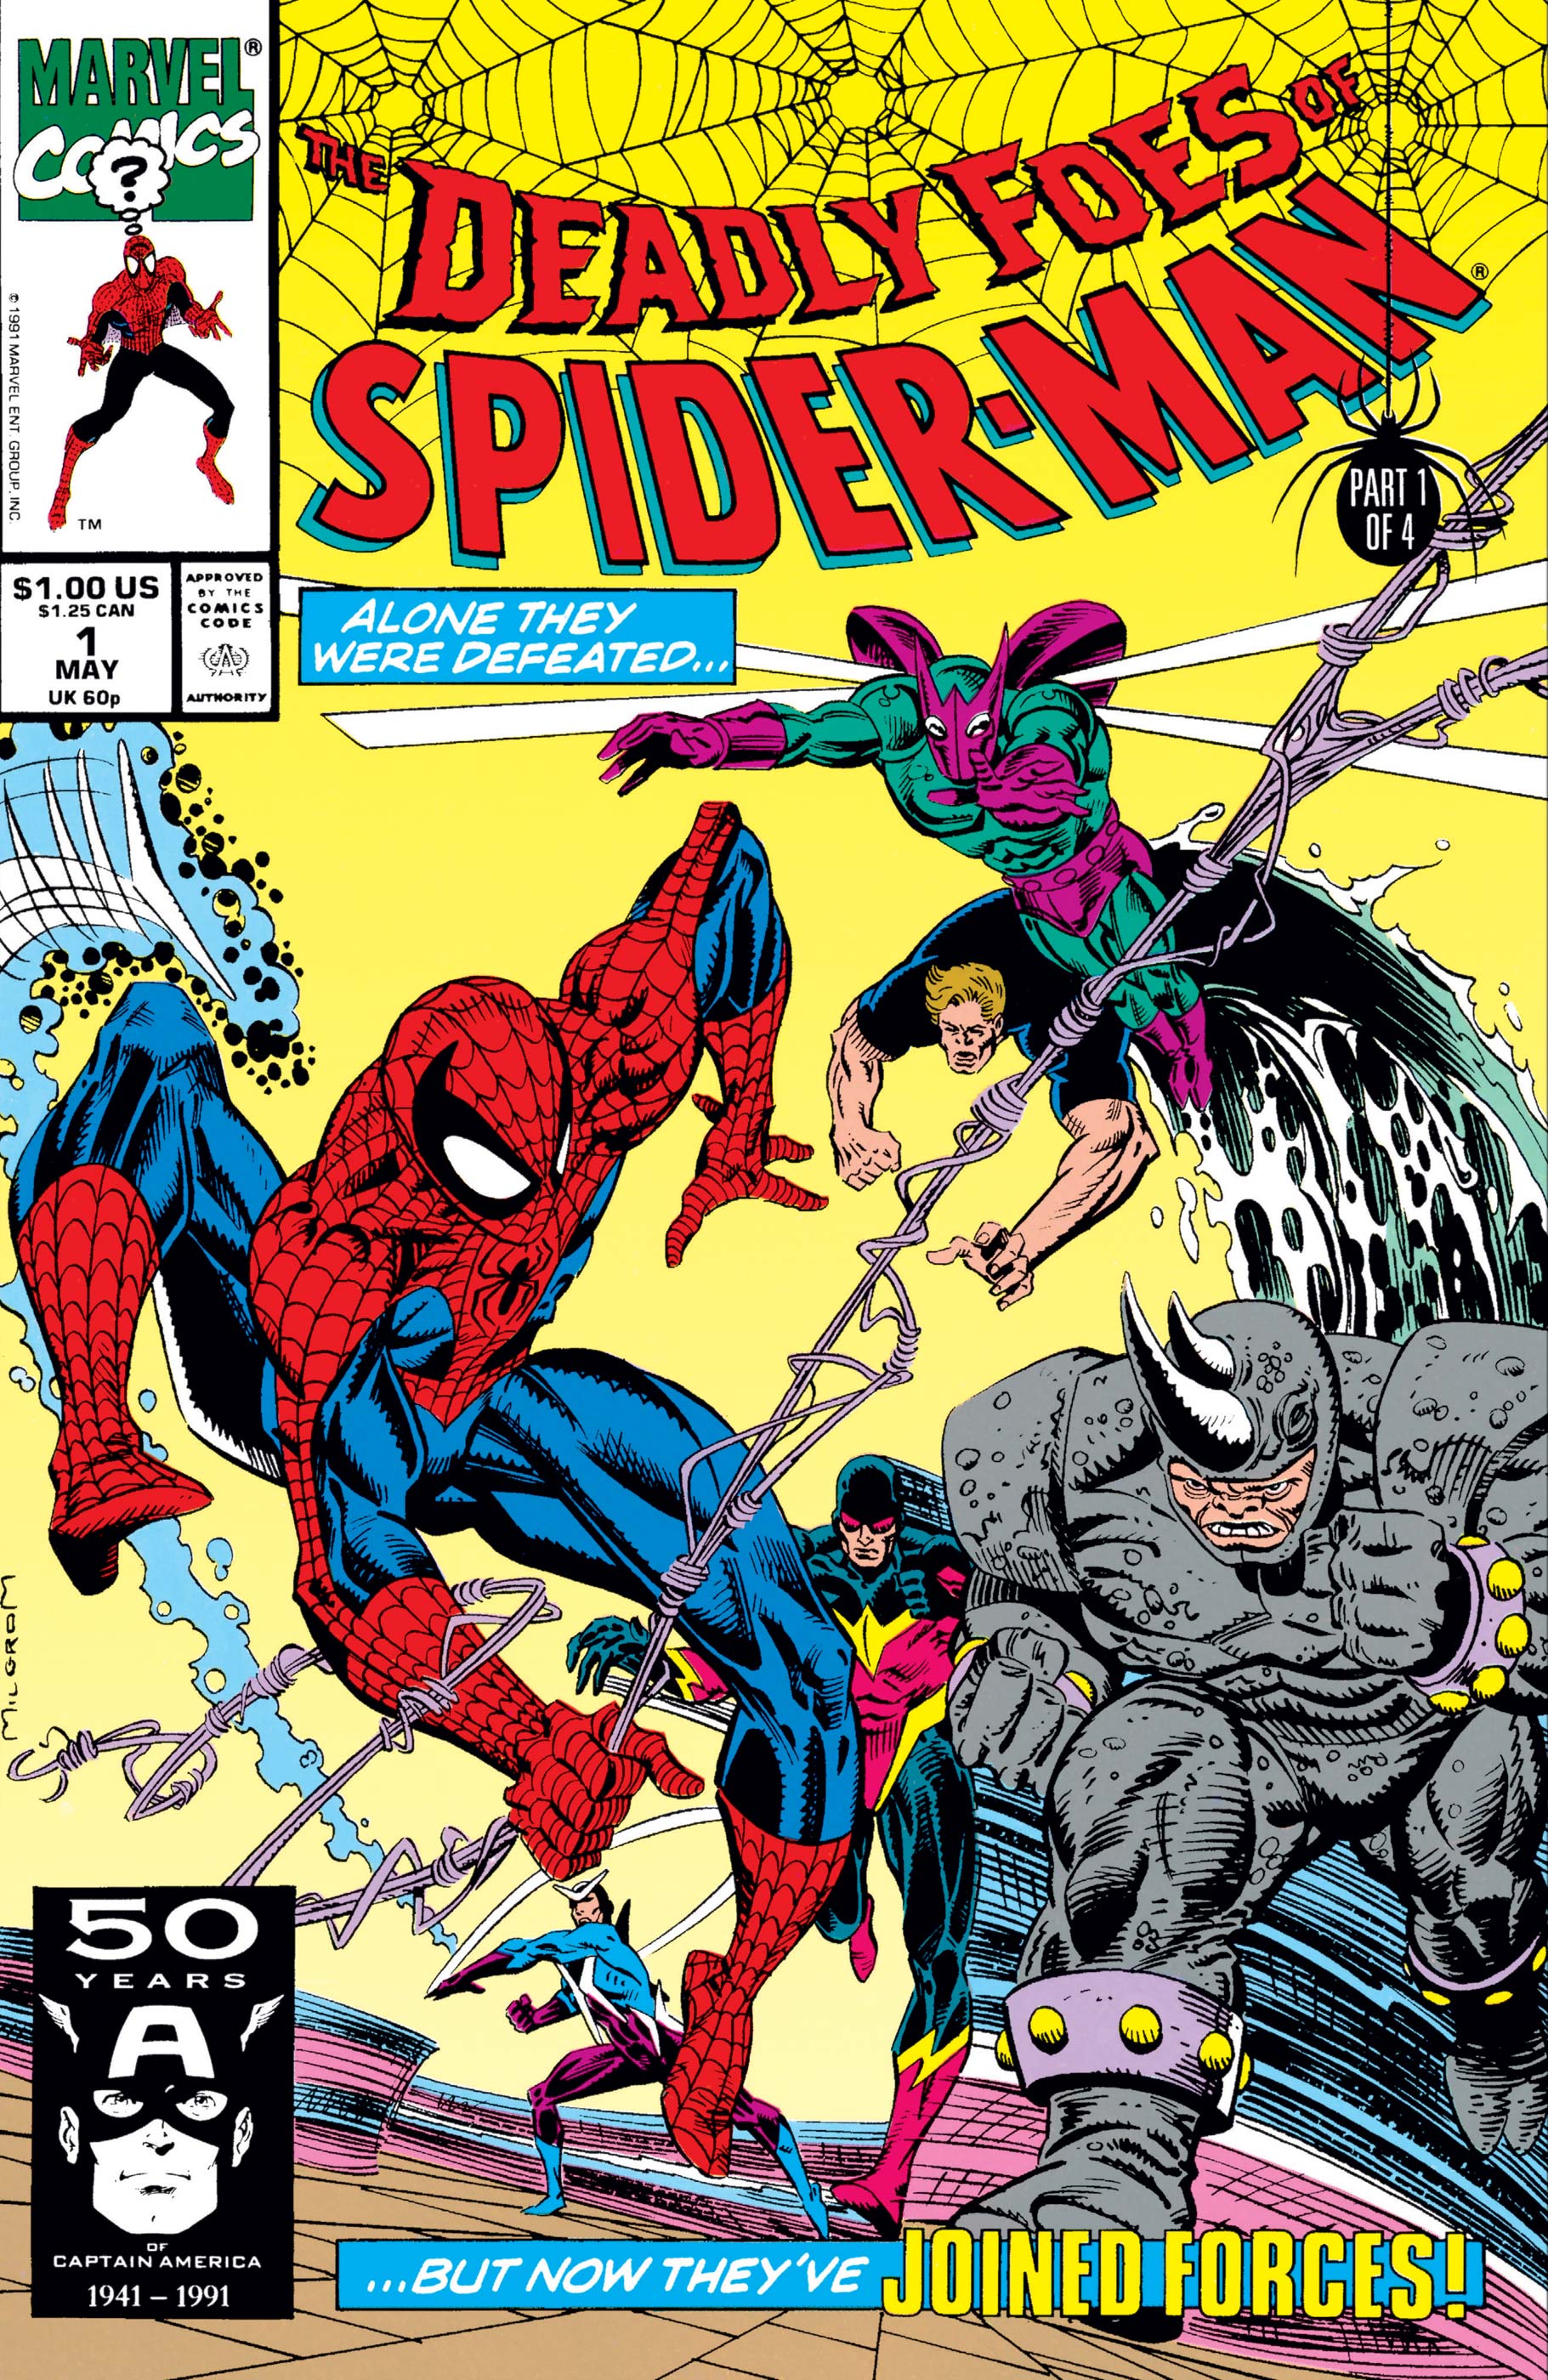 Deadly Foes of Spider-Man (1991) #1